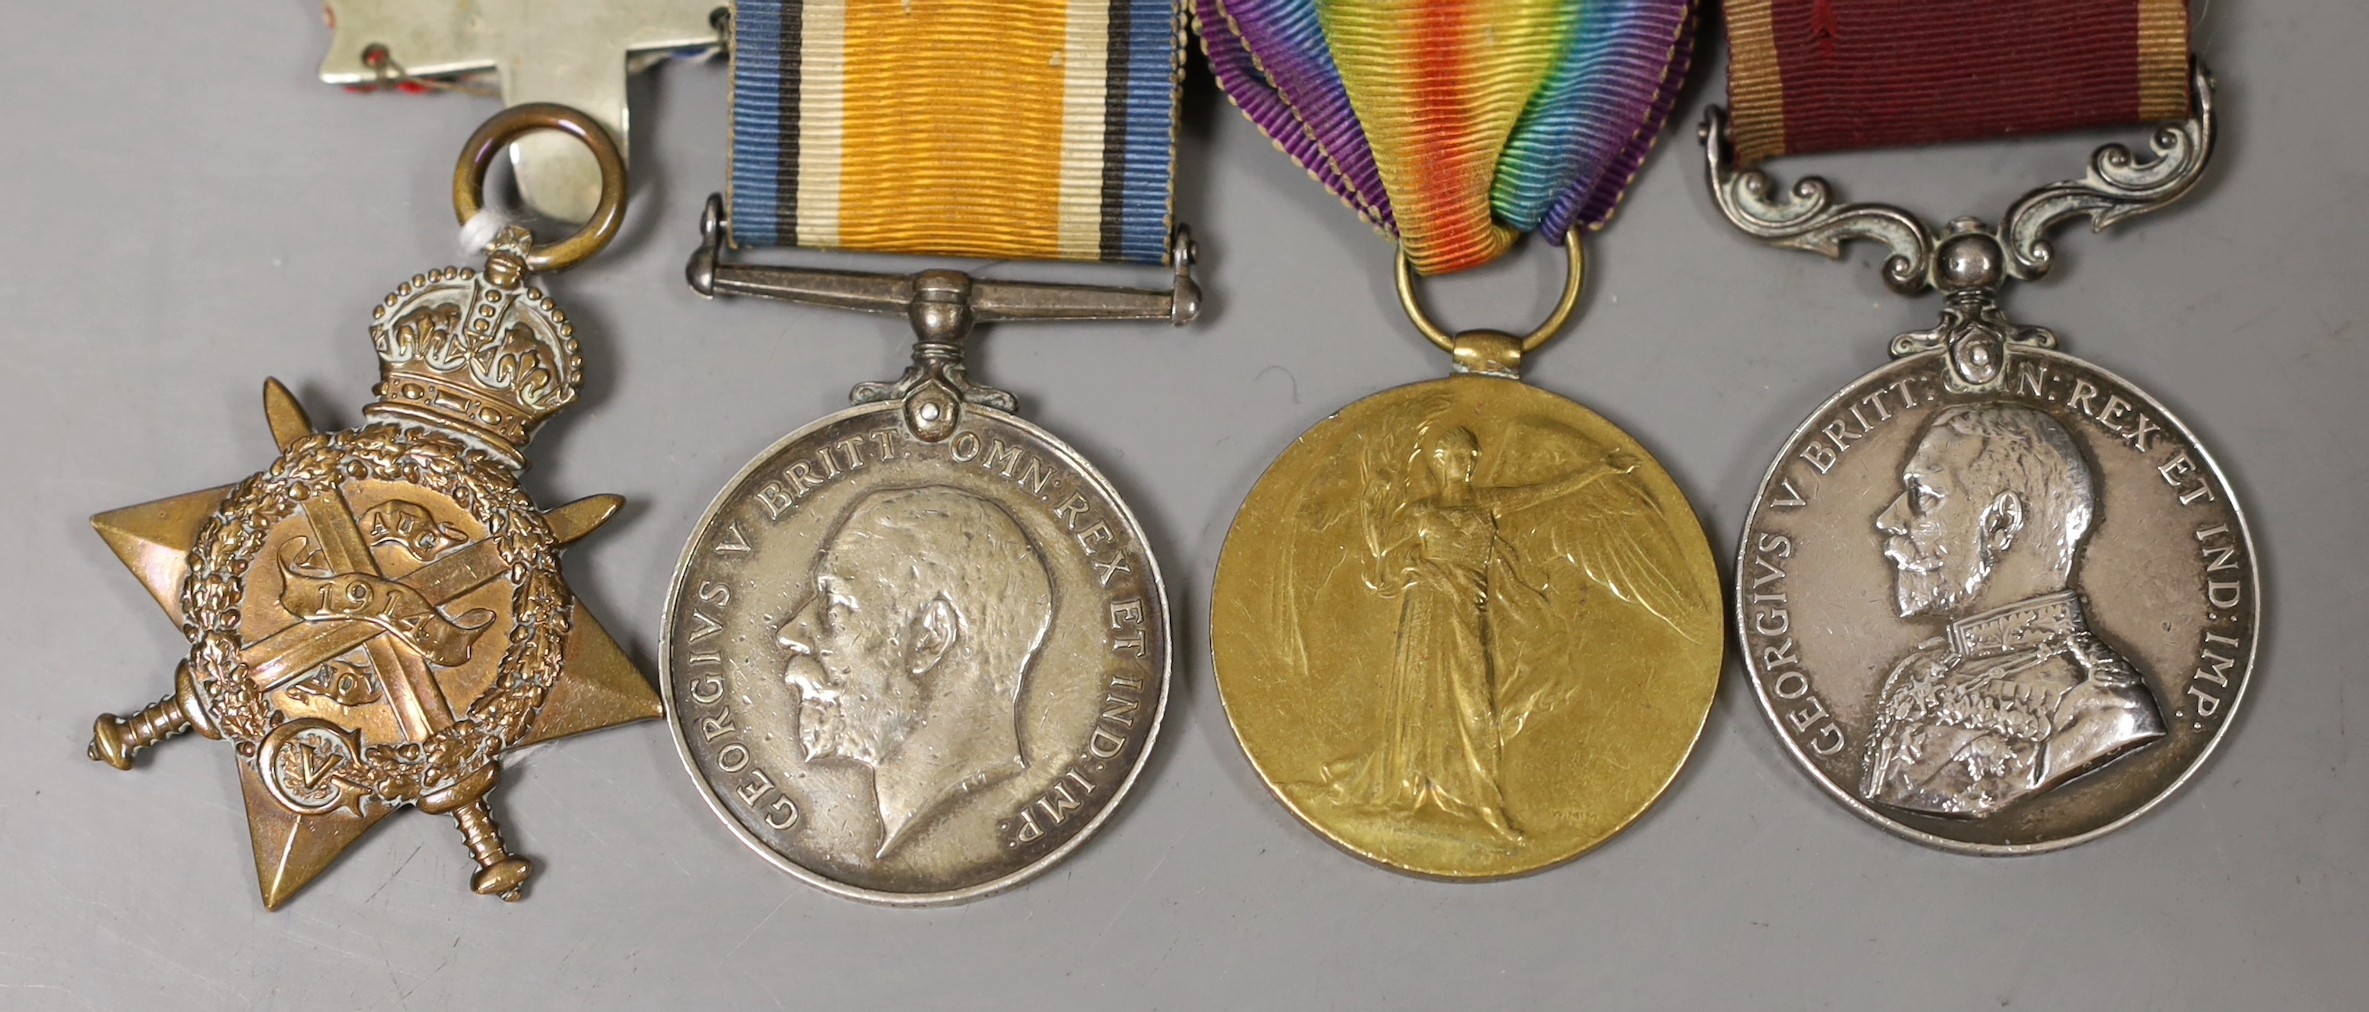 WWI medals: a group of four including Long Service 7144338 CPL. W. COOPER. CONN. RANG and 8941 PTE. W. COOPER. CONN. RANG.